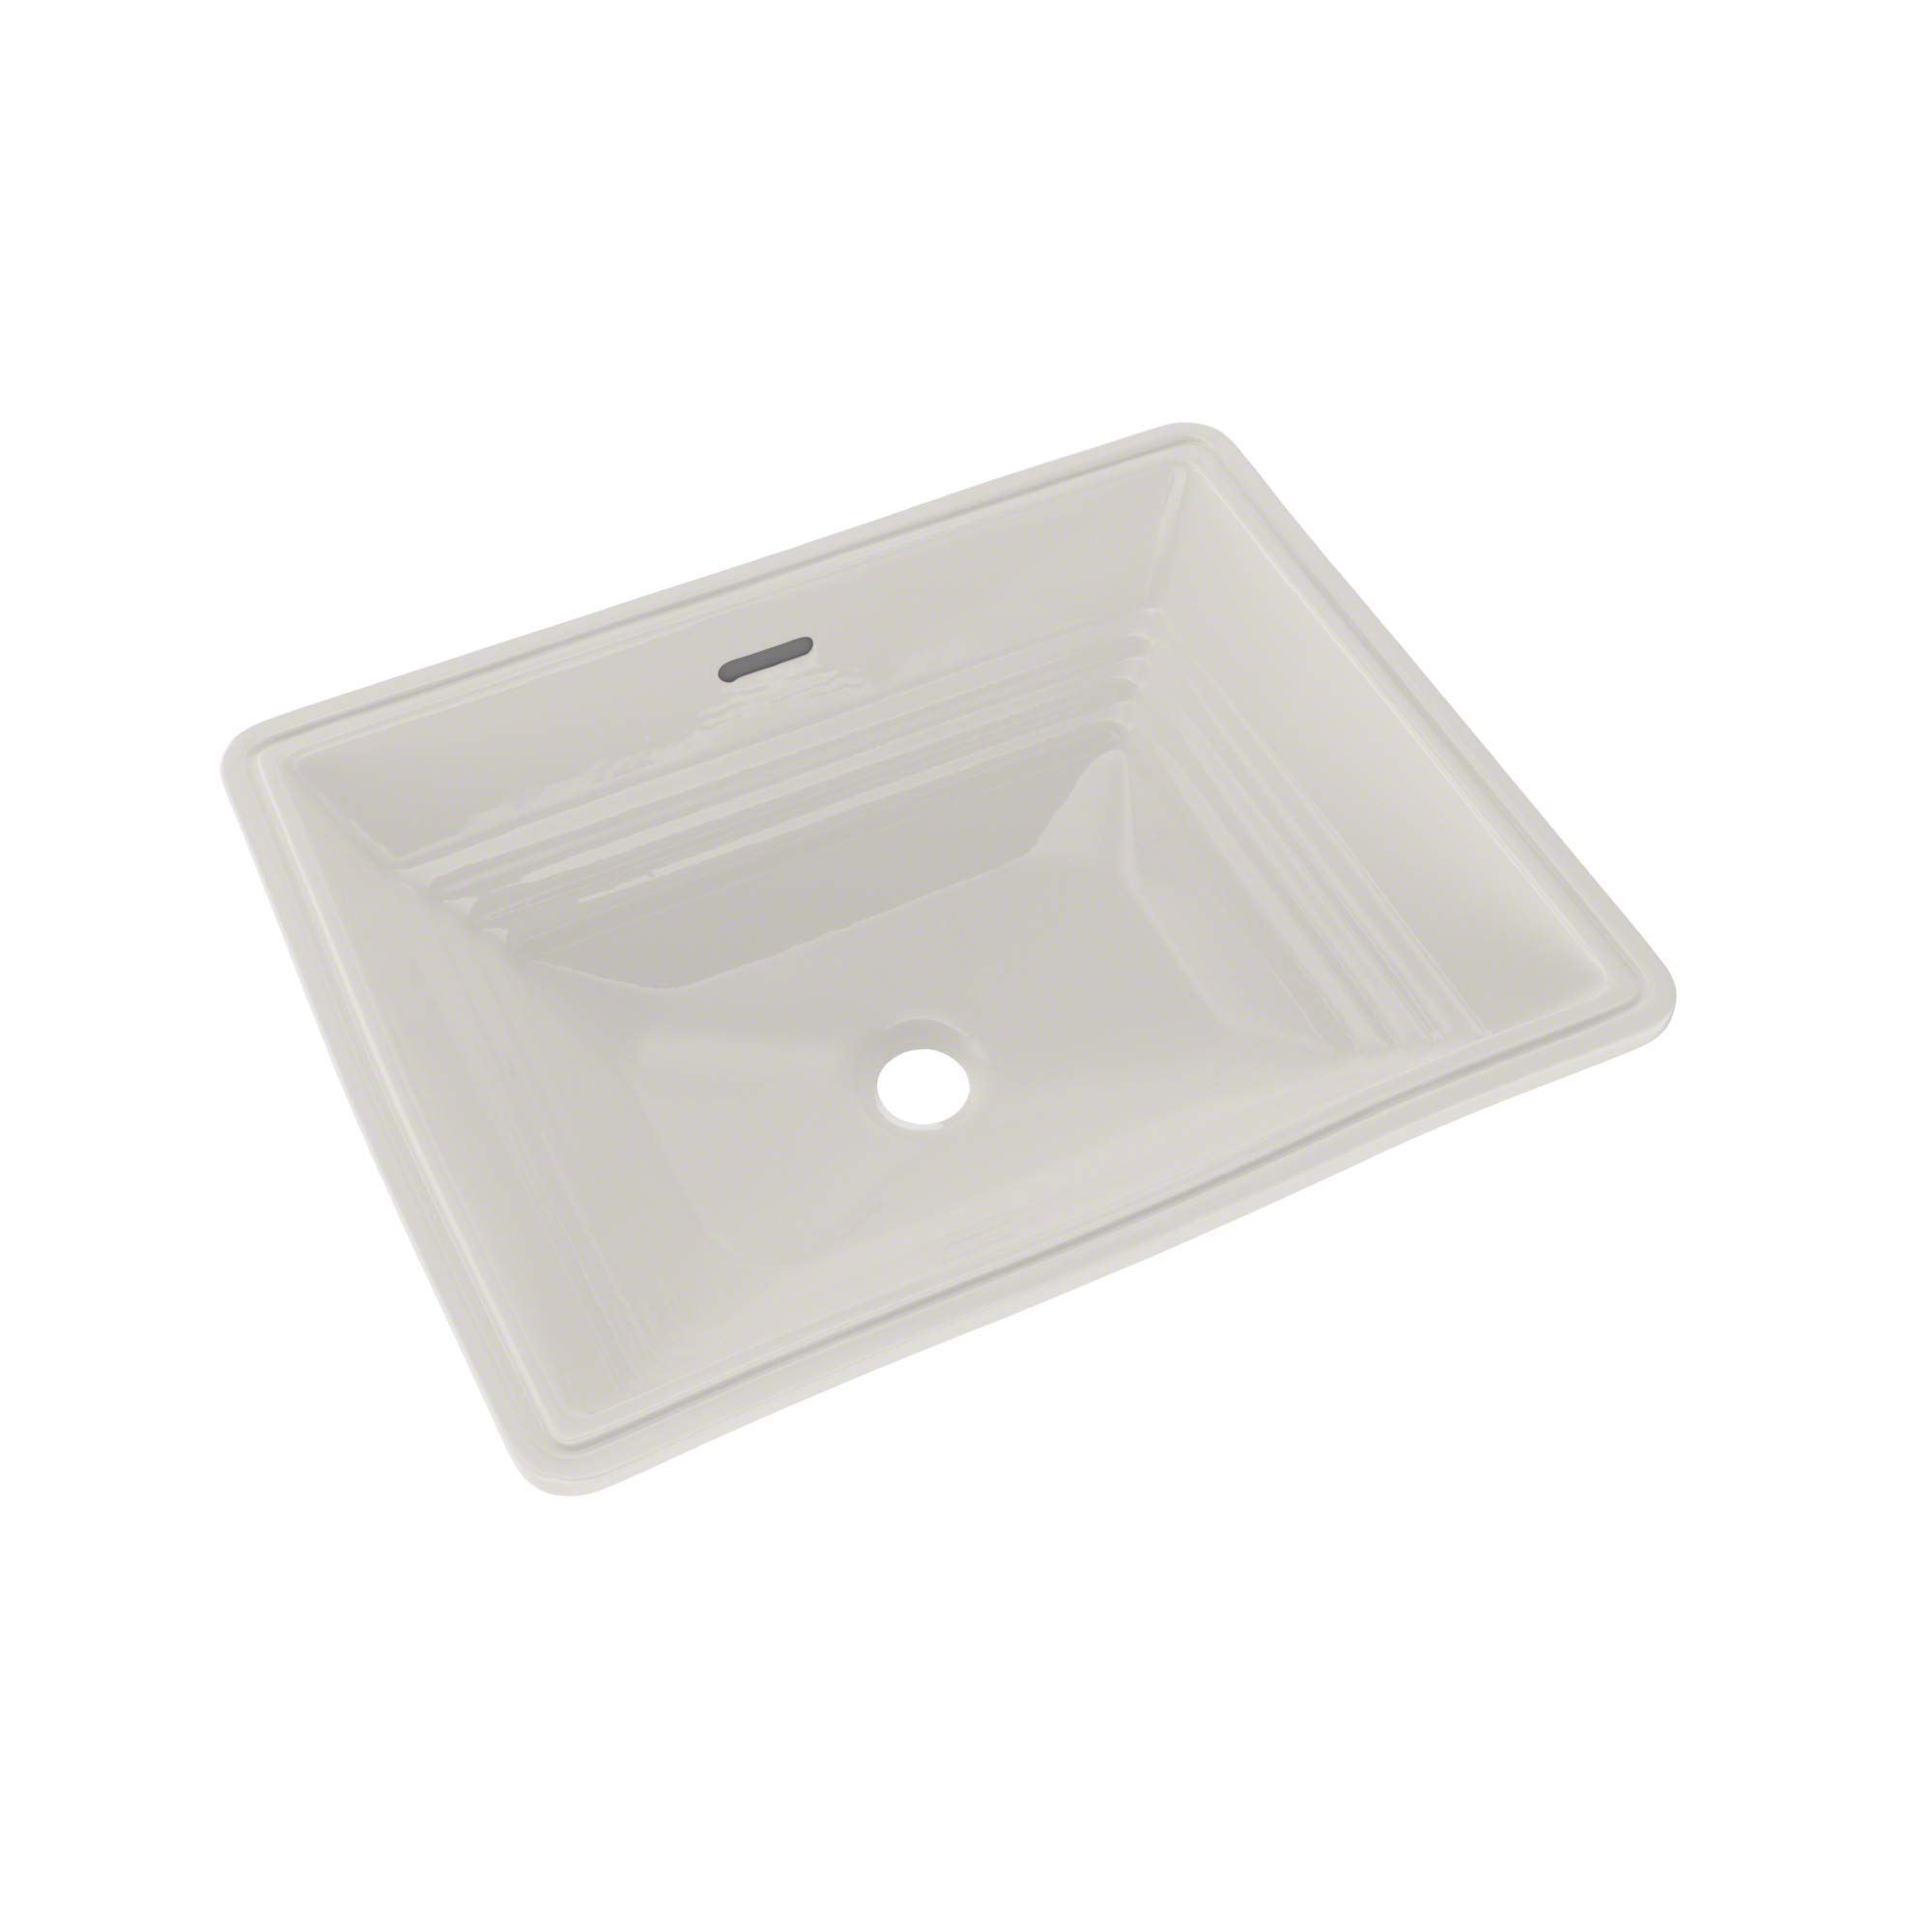 Toto LT533#11 Promenade 20-1/2-Inch by 16-1/2-Inch Undercounter Lavatory Sink, Colonial White